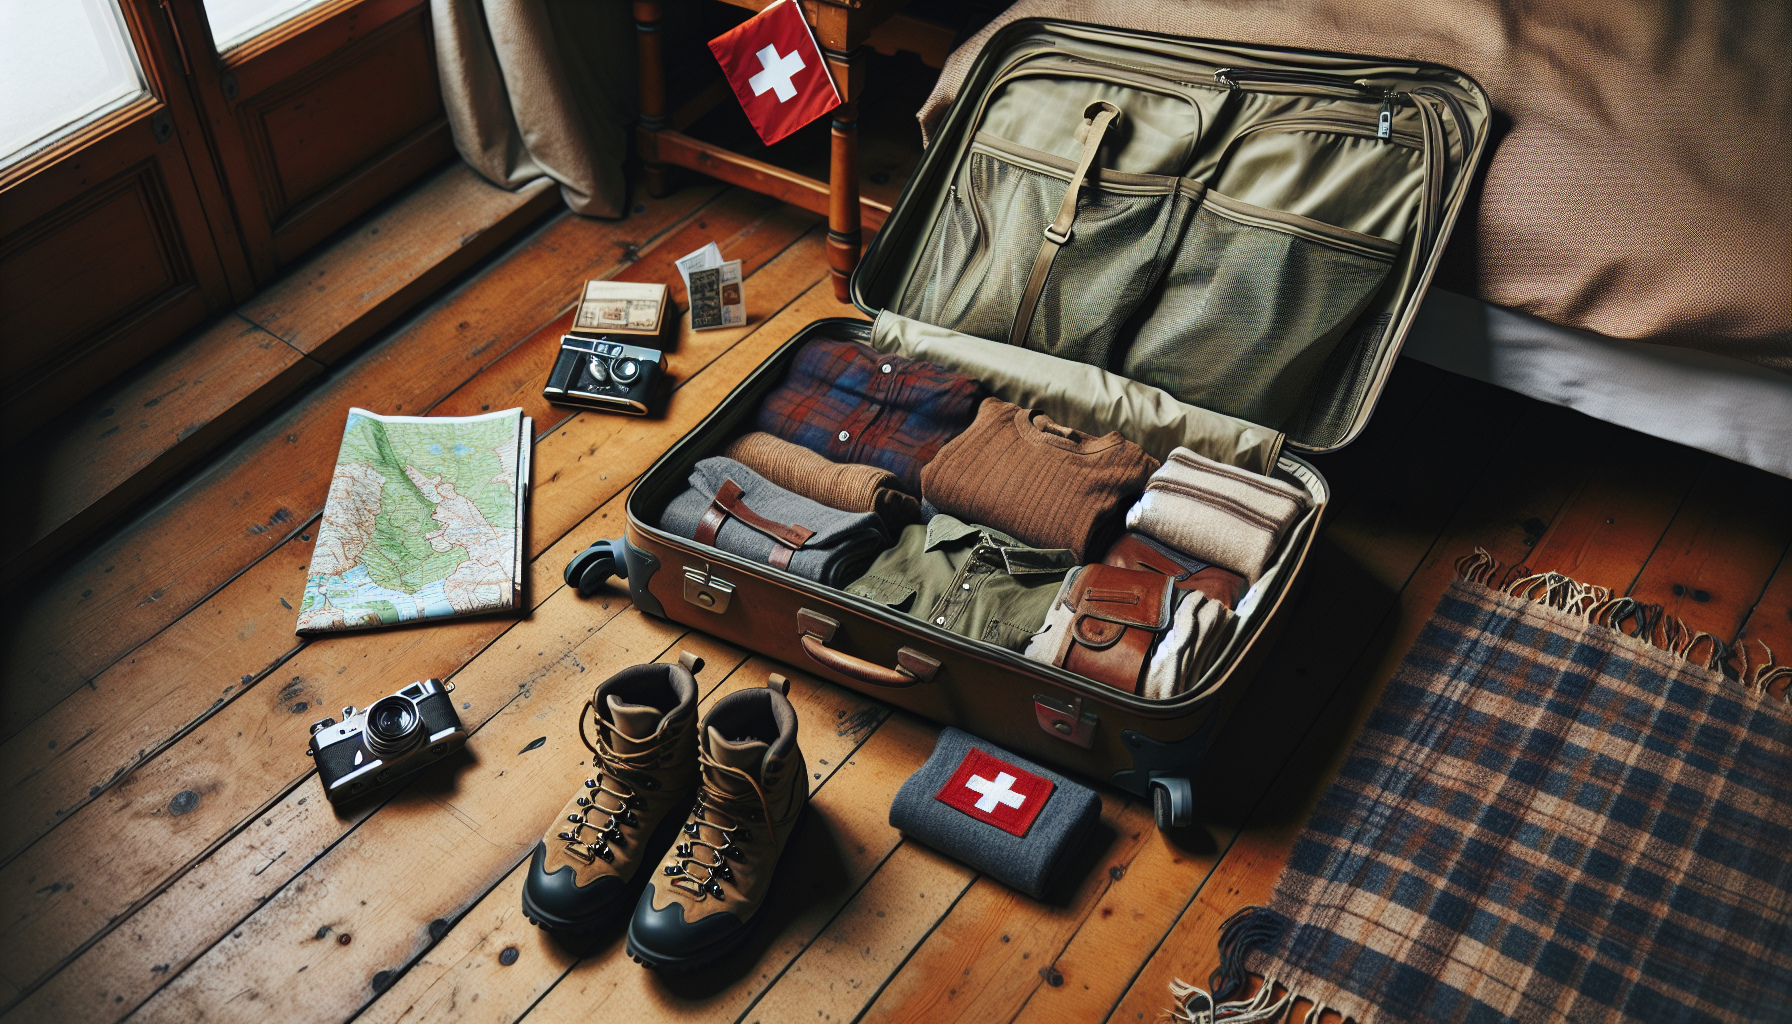 Efficiently packed luggage with neatly organized clothing and essentials